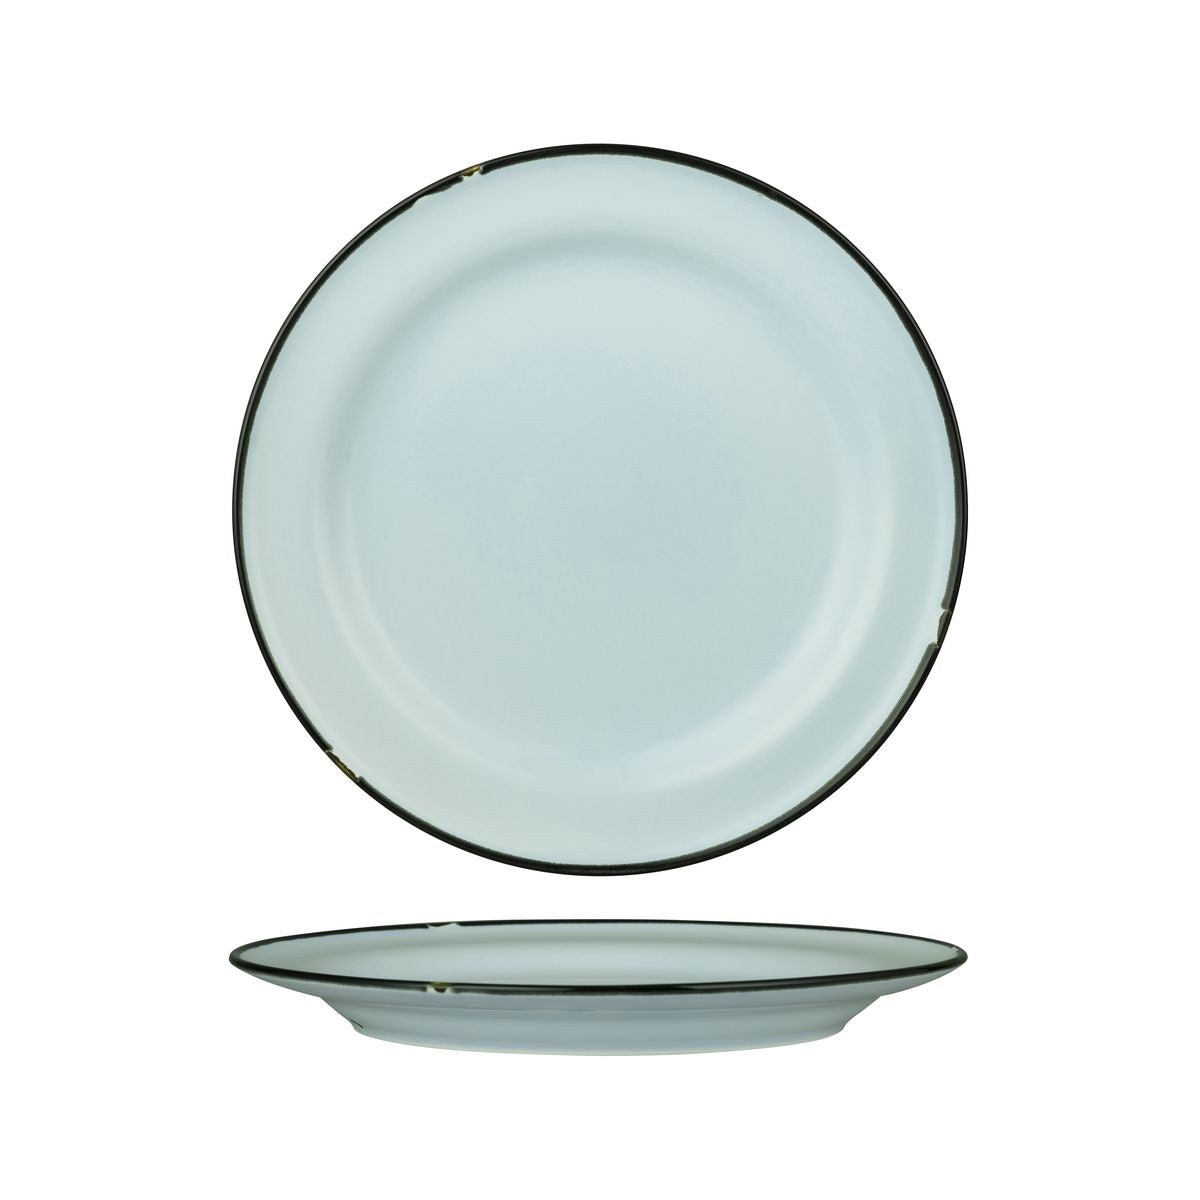 Round Plate - 270mm, Tintin Blue & Black from Luzerne. made out of Ceramic and sold in boxes of 12. Hospitality quality at wholesale price with The Flying Fork! 